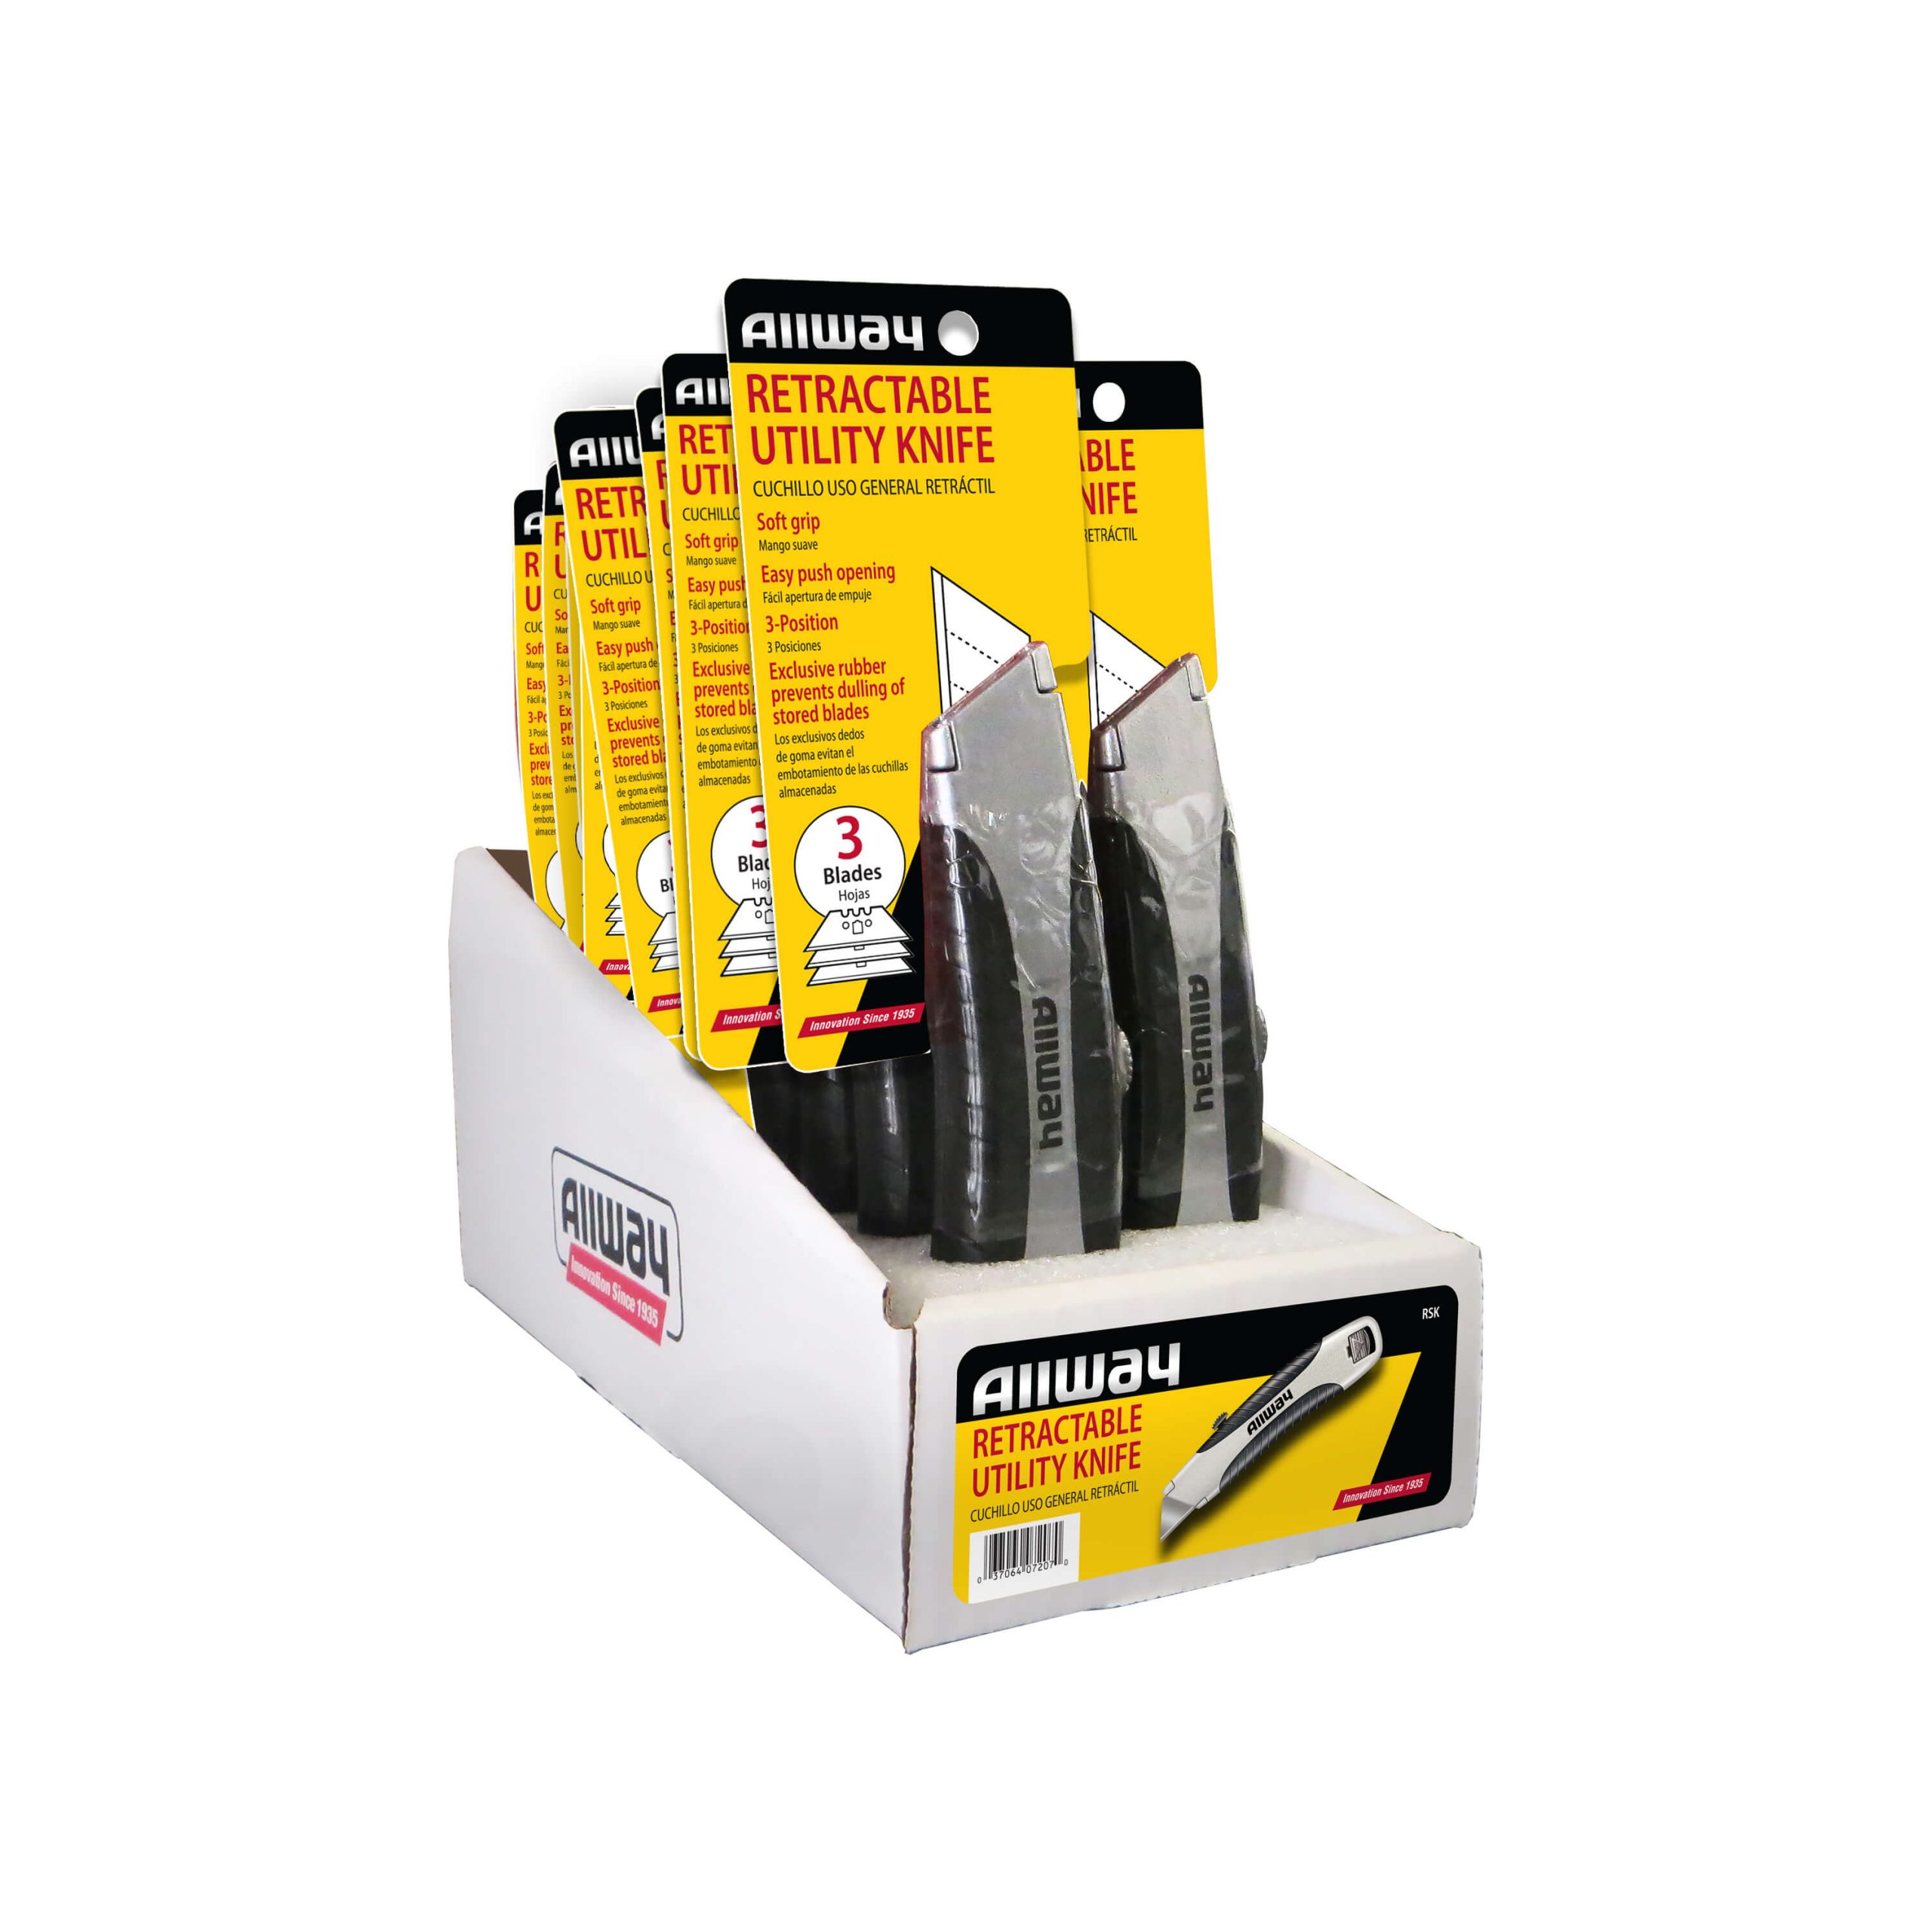 Alvin Utility Blades (Pack of 5)